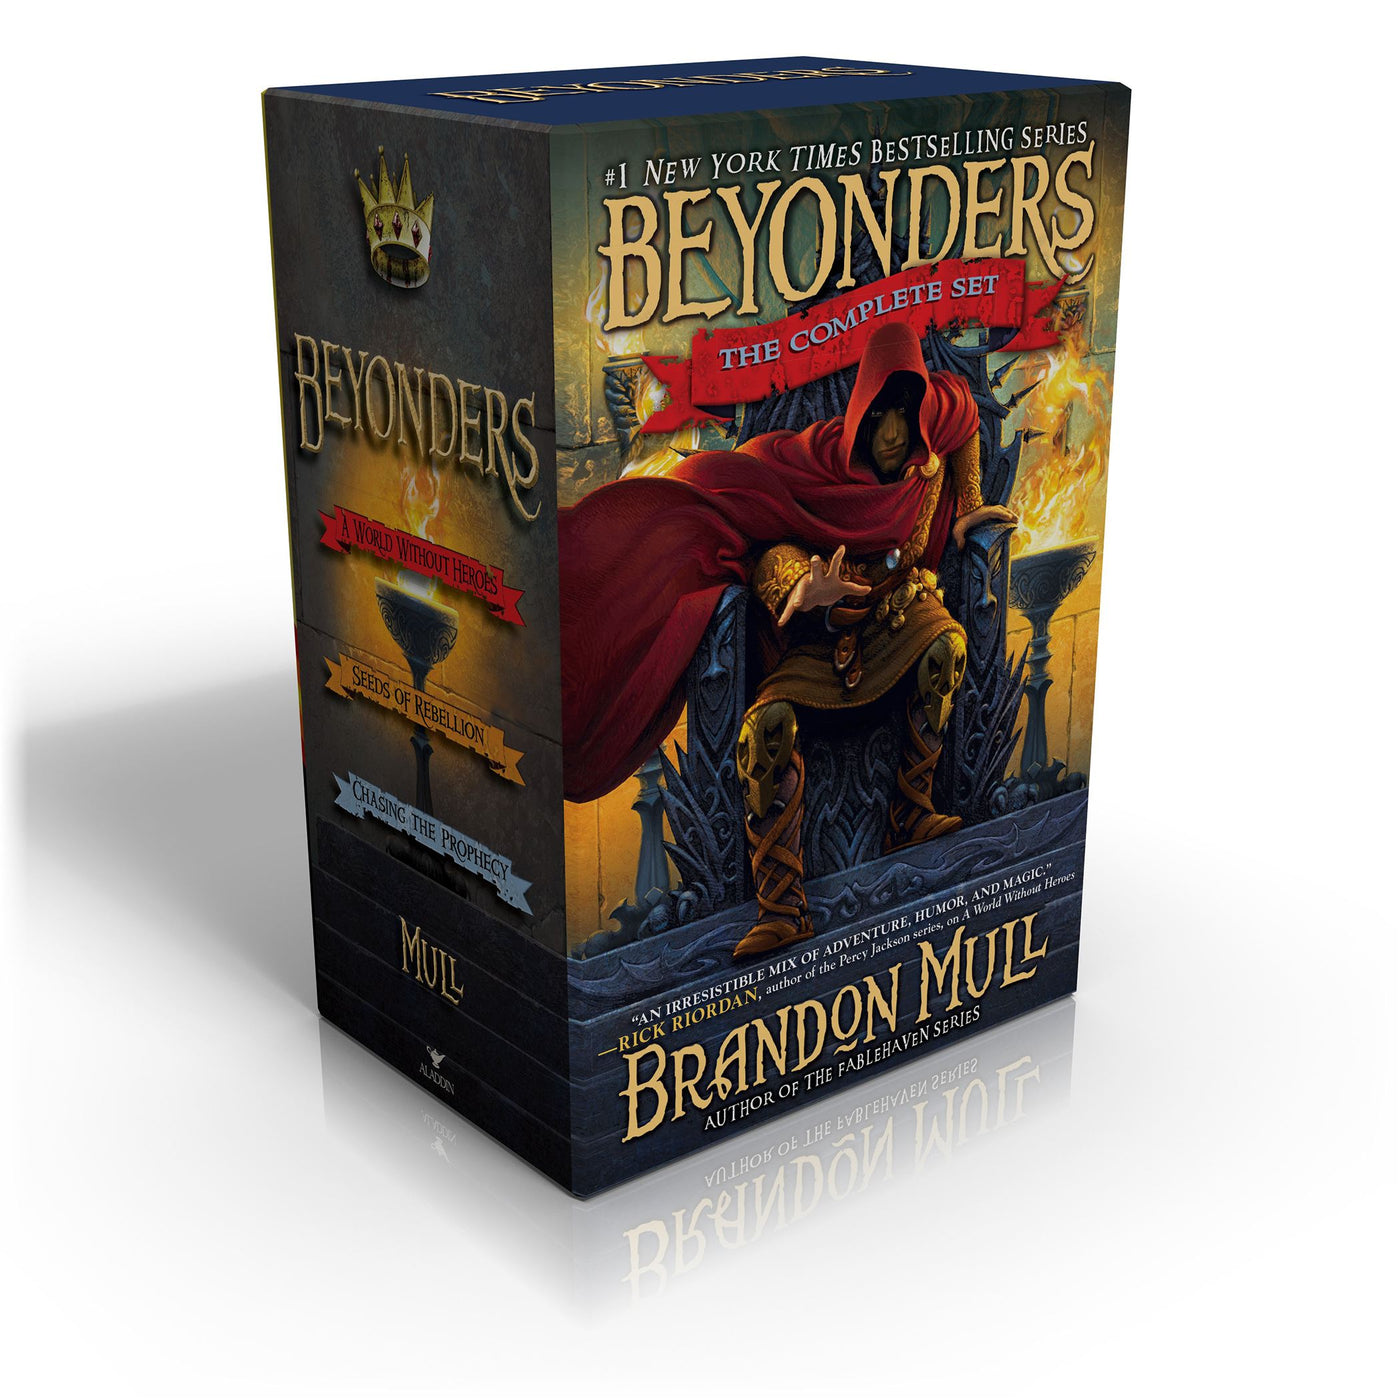 Beyonders The Complete Set (Boxed Set)